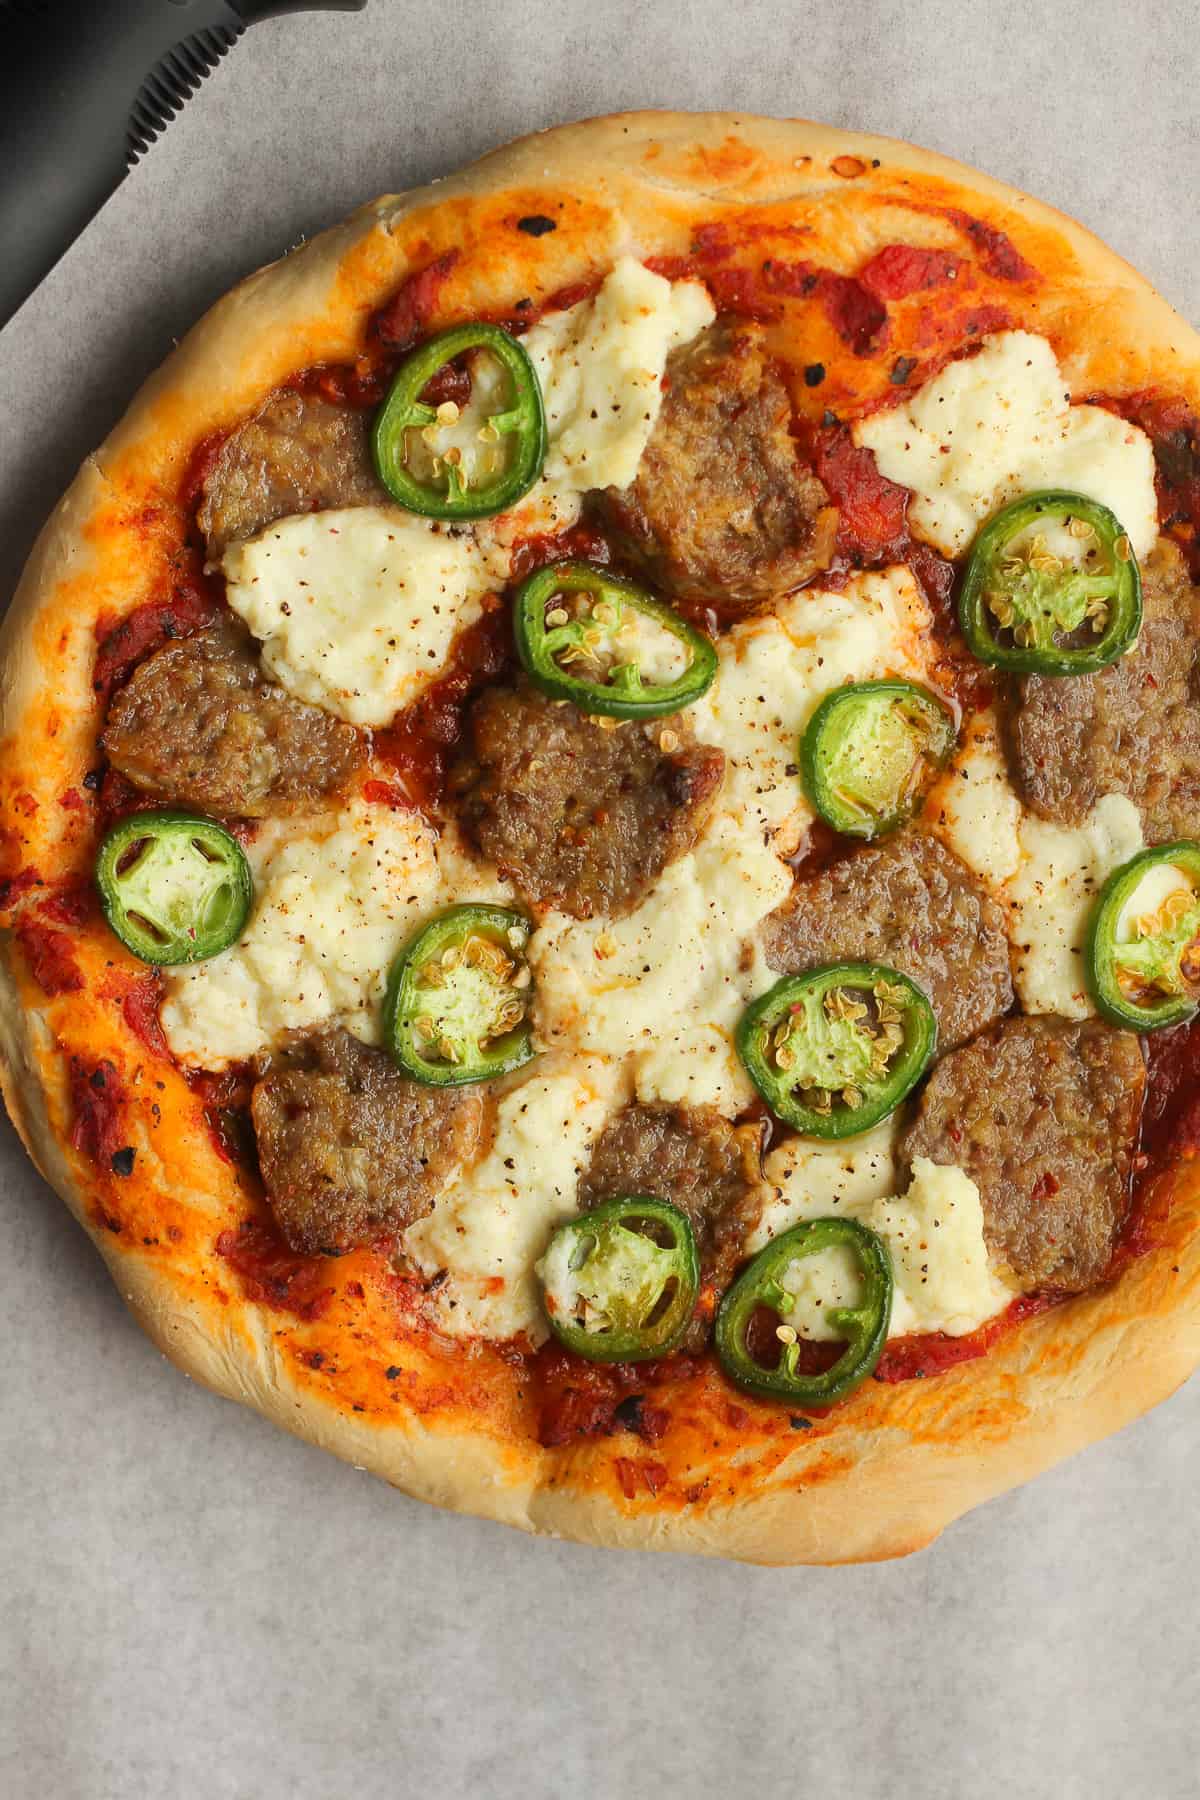 A meatball pizza with ricotta, before slicing.